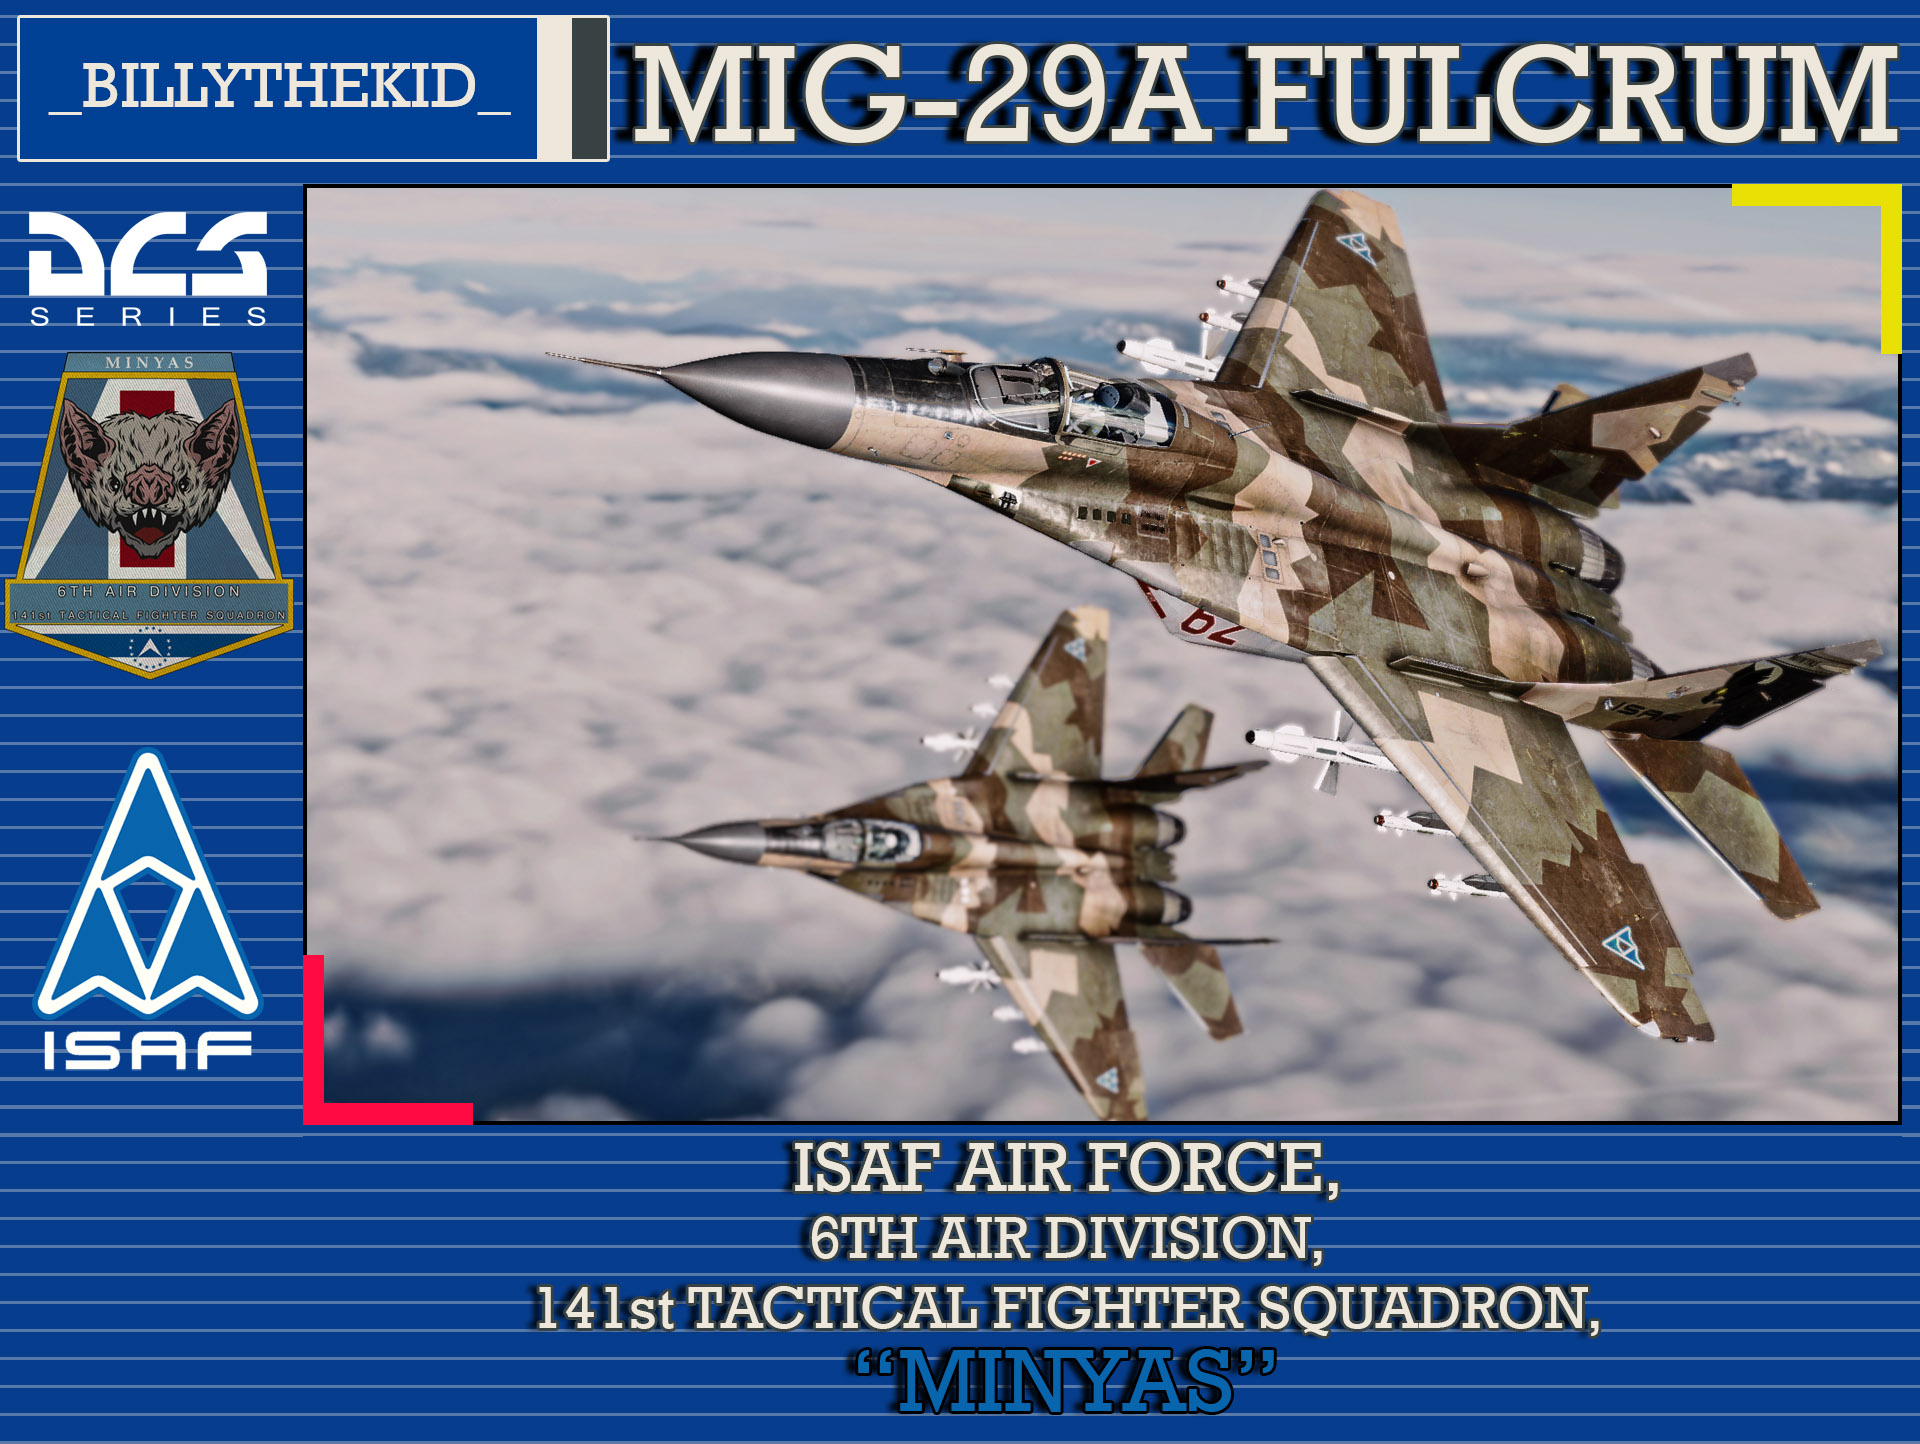 Ace Combat - ISAF Air Force - 6th Air Division - 141st Tactical Fighter Squadron "Minyas" MiG-29A